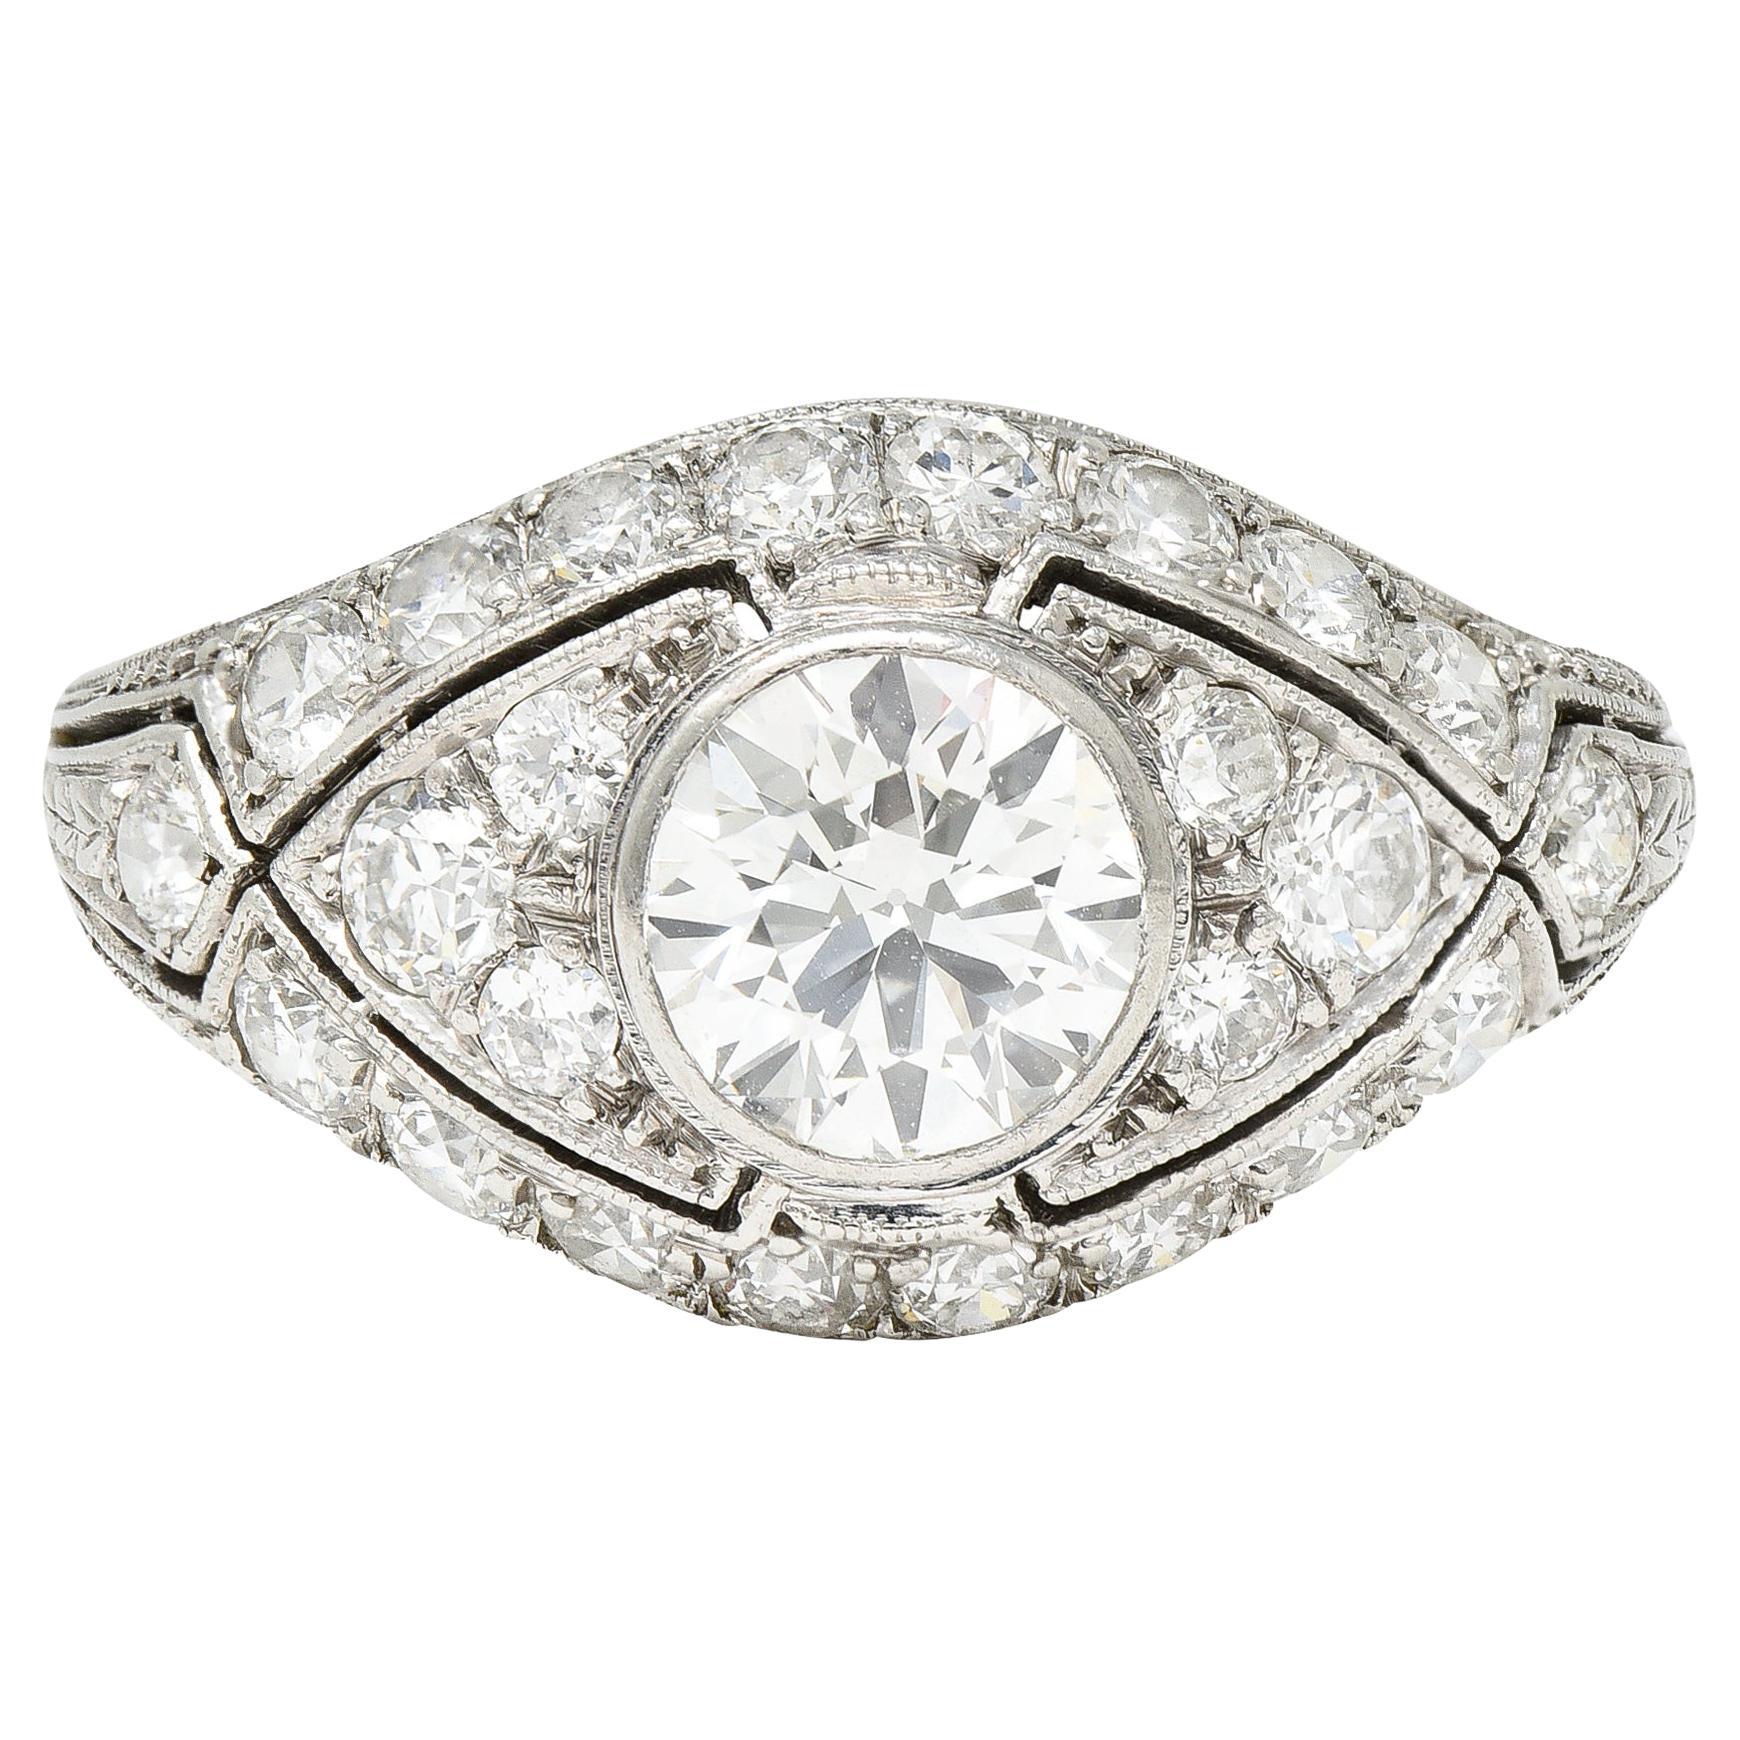 Marcus and Co. Art Deco 1.95 Carats Diamond Platinum Bombè Band Engagement Ring For Sale